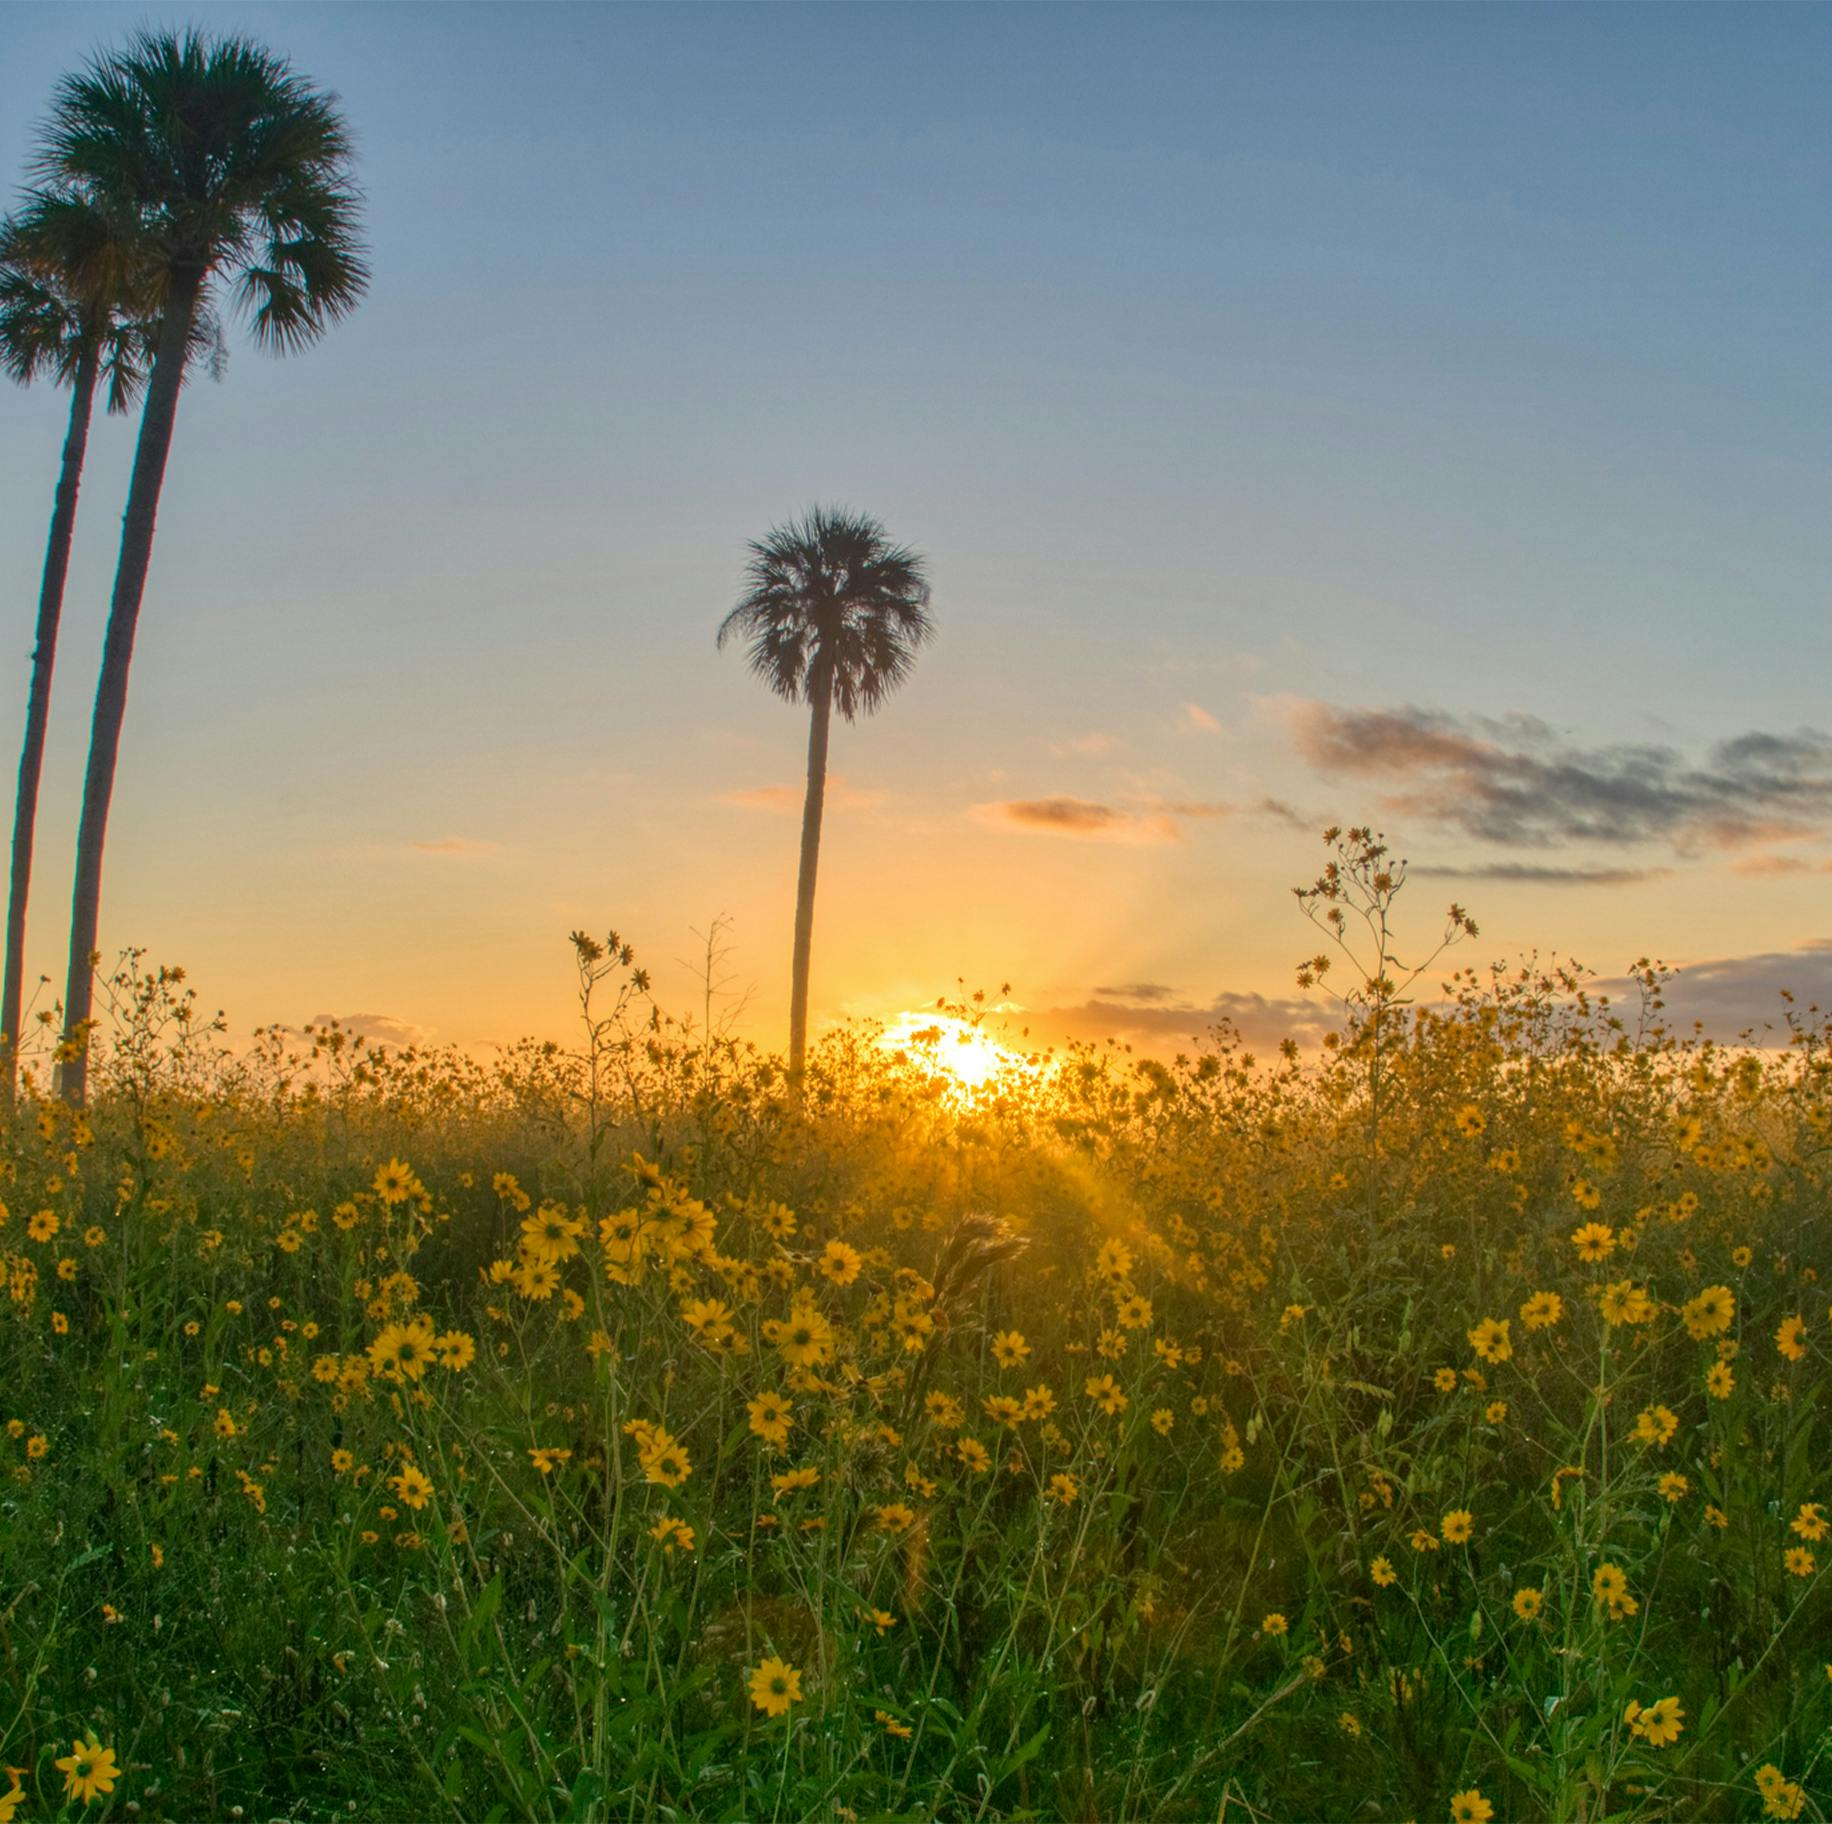 daisies and palm trees at sunset